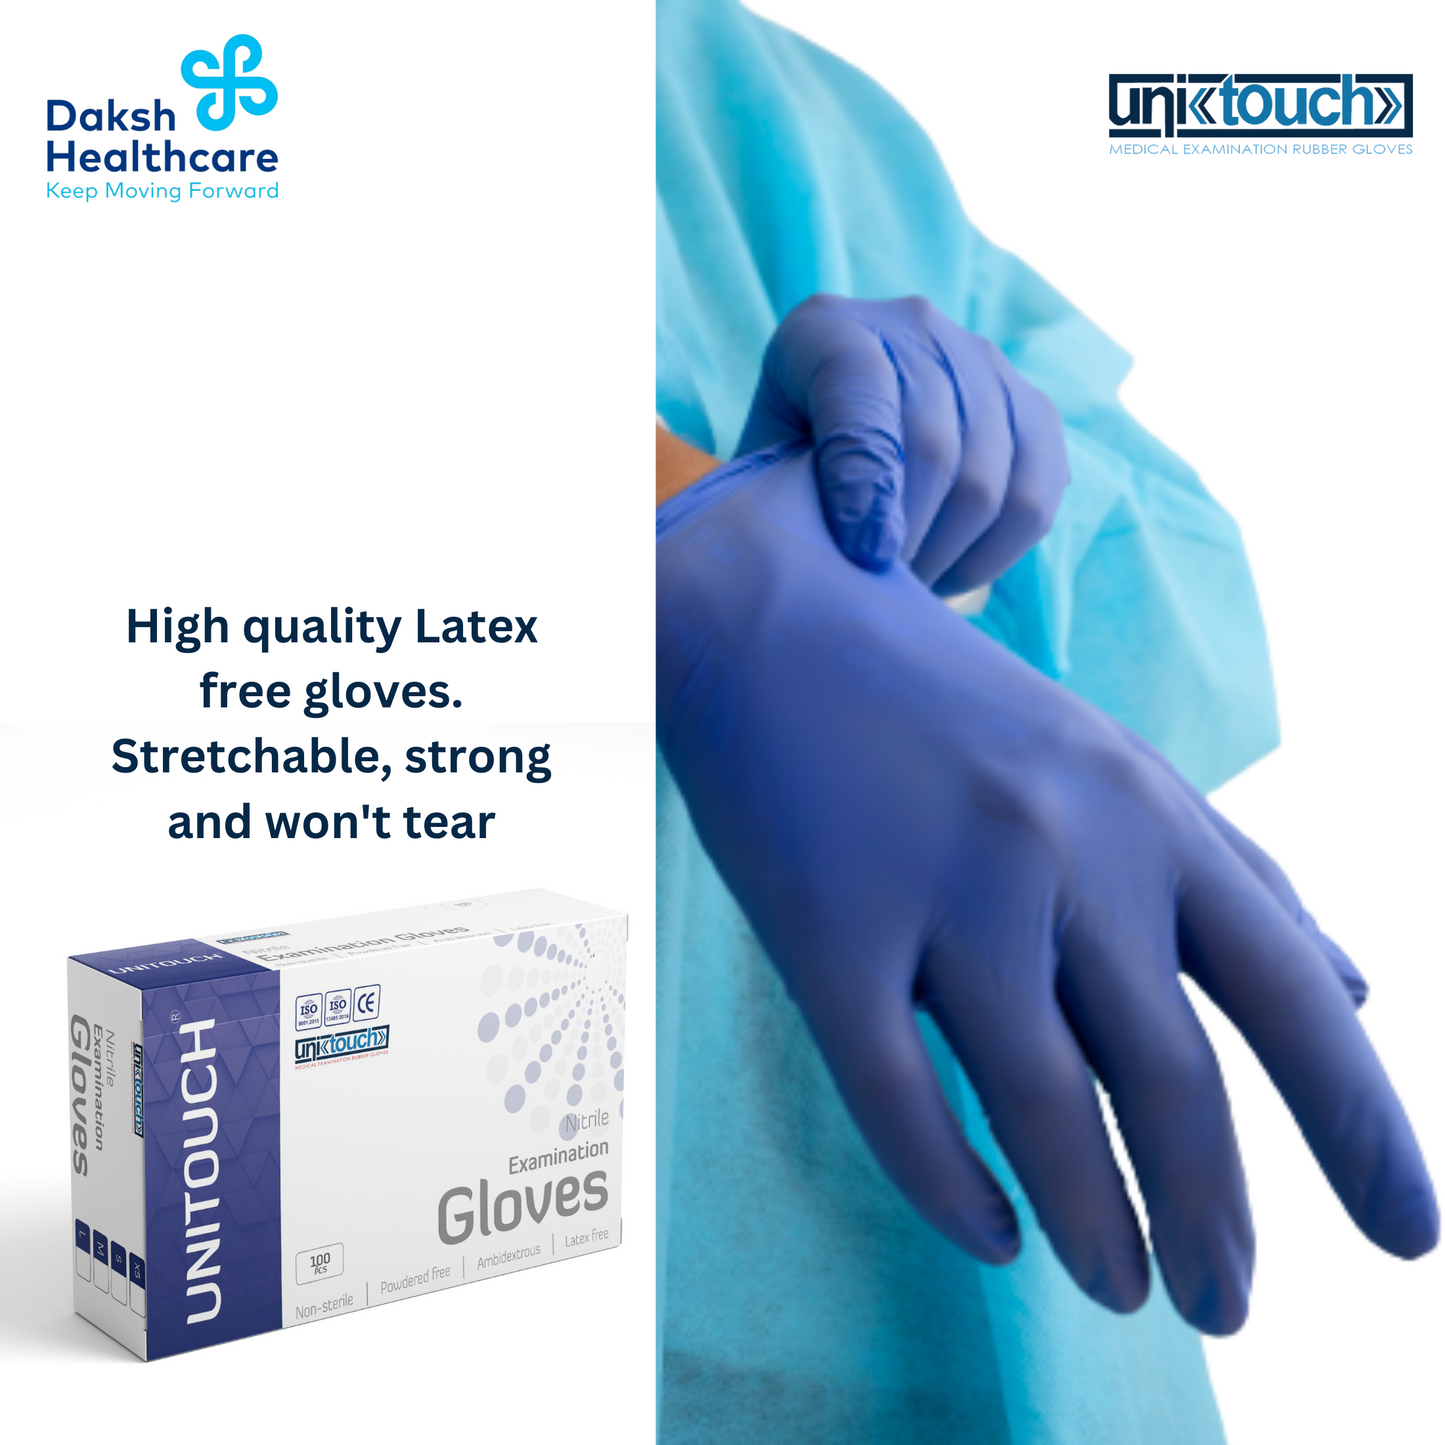 Unitouch Nitrile Powdered Free Examination Gloves (Purple) Pack of 100 Pcs